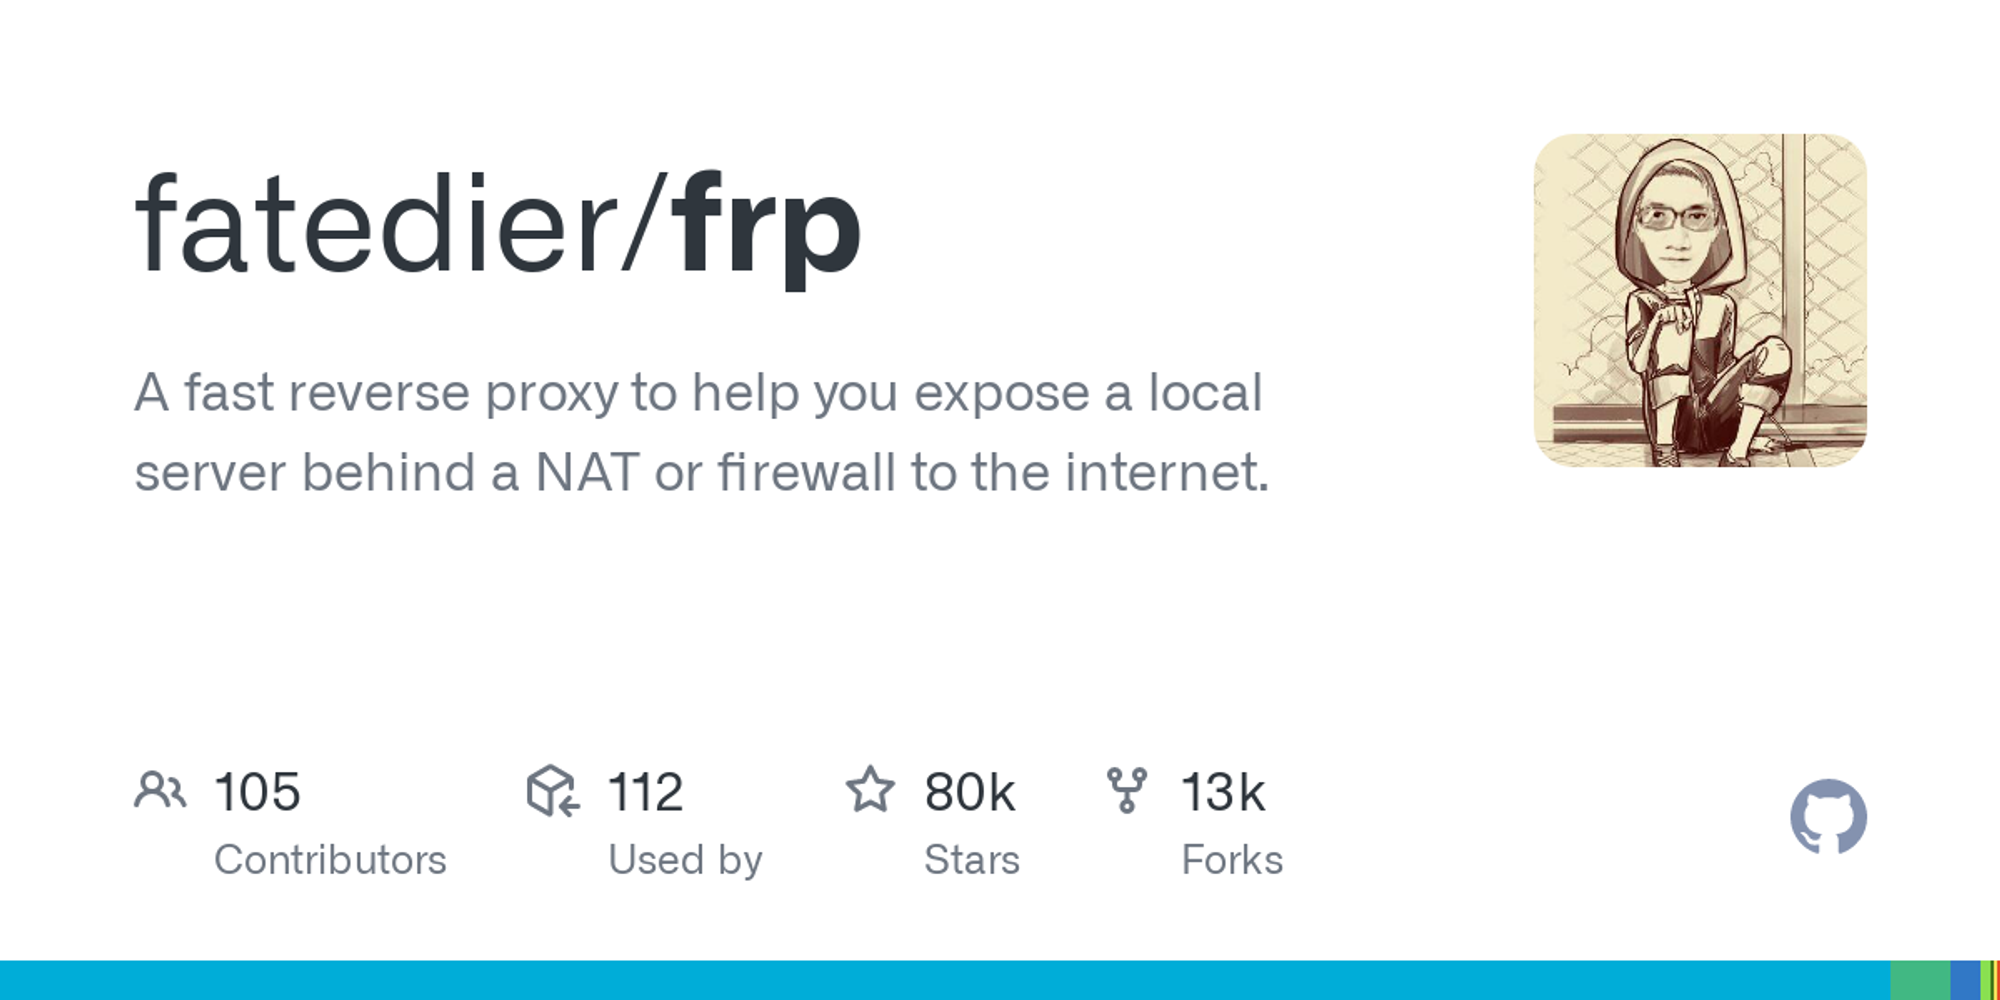 GitHub - fatedier/frp: A fast reverse proxy to help you expose a local server behind a NAT or firewall to the internet.